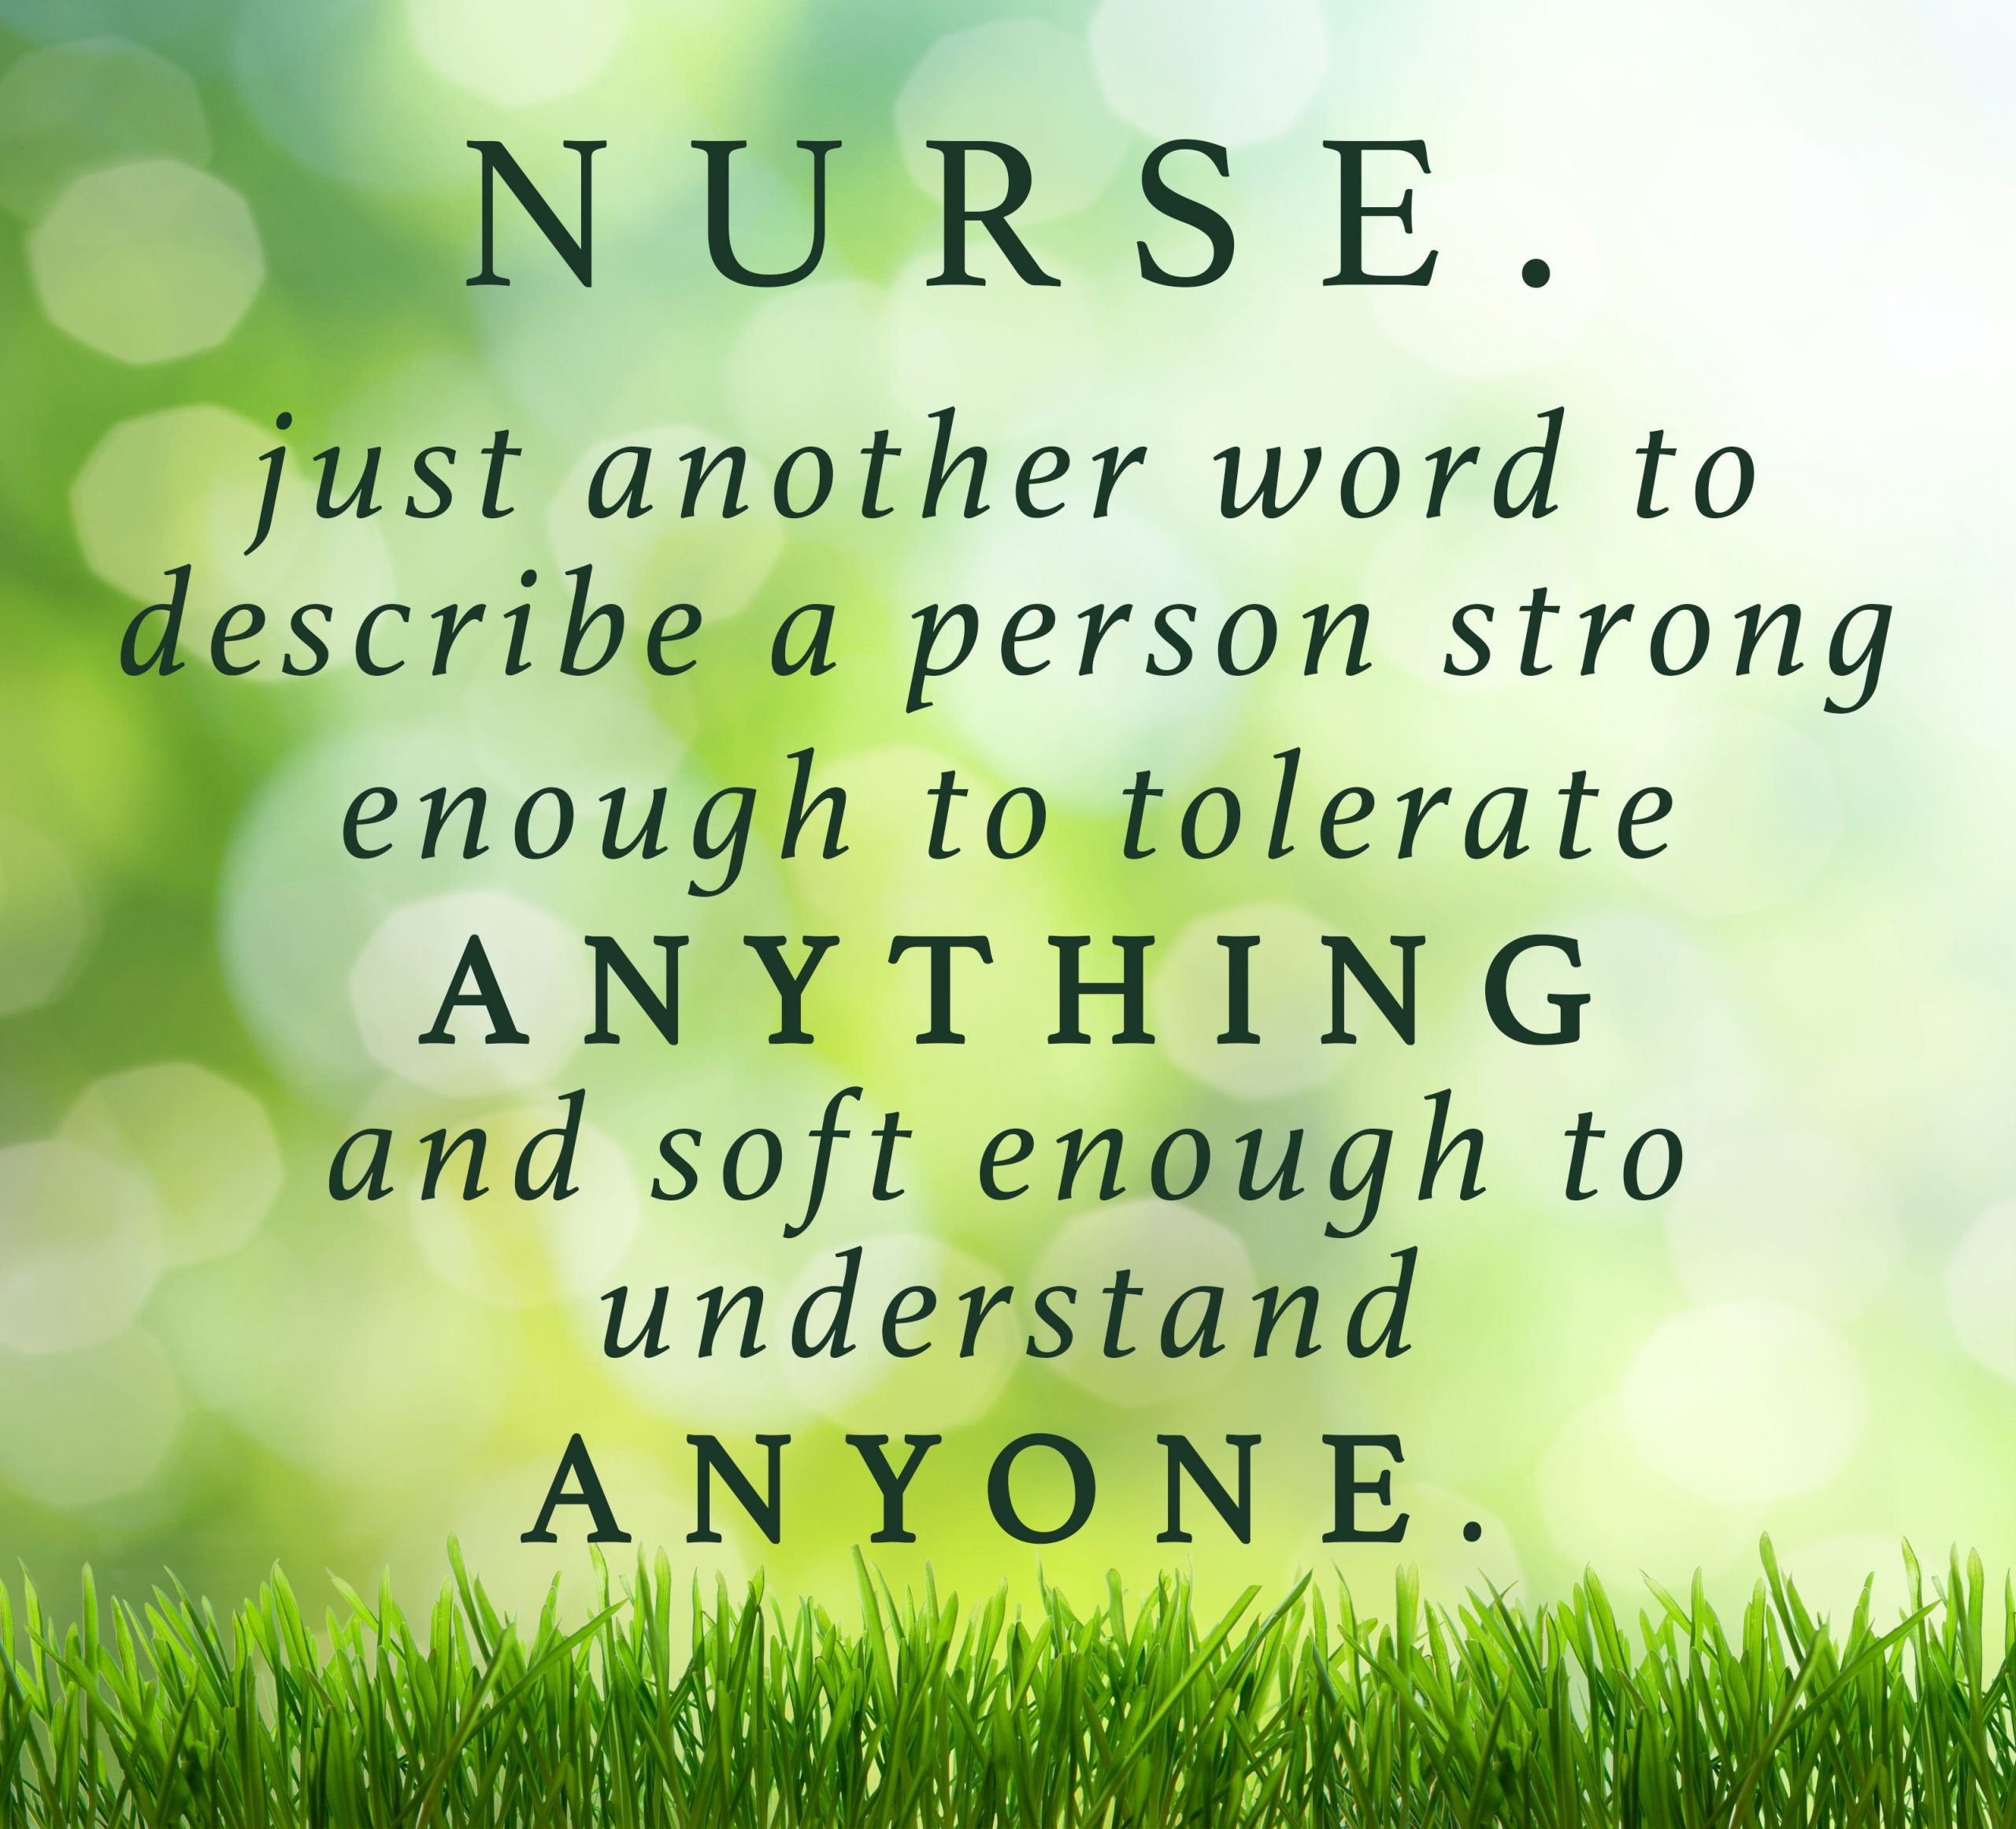 Nursing Leadership Quotes
 15 Inspirational Quotes About Being A Nurse Enclothed